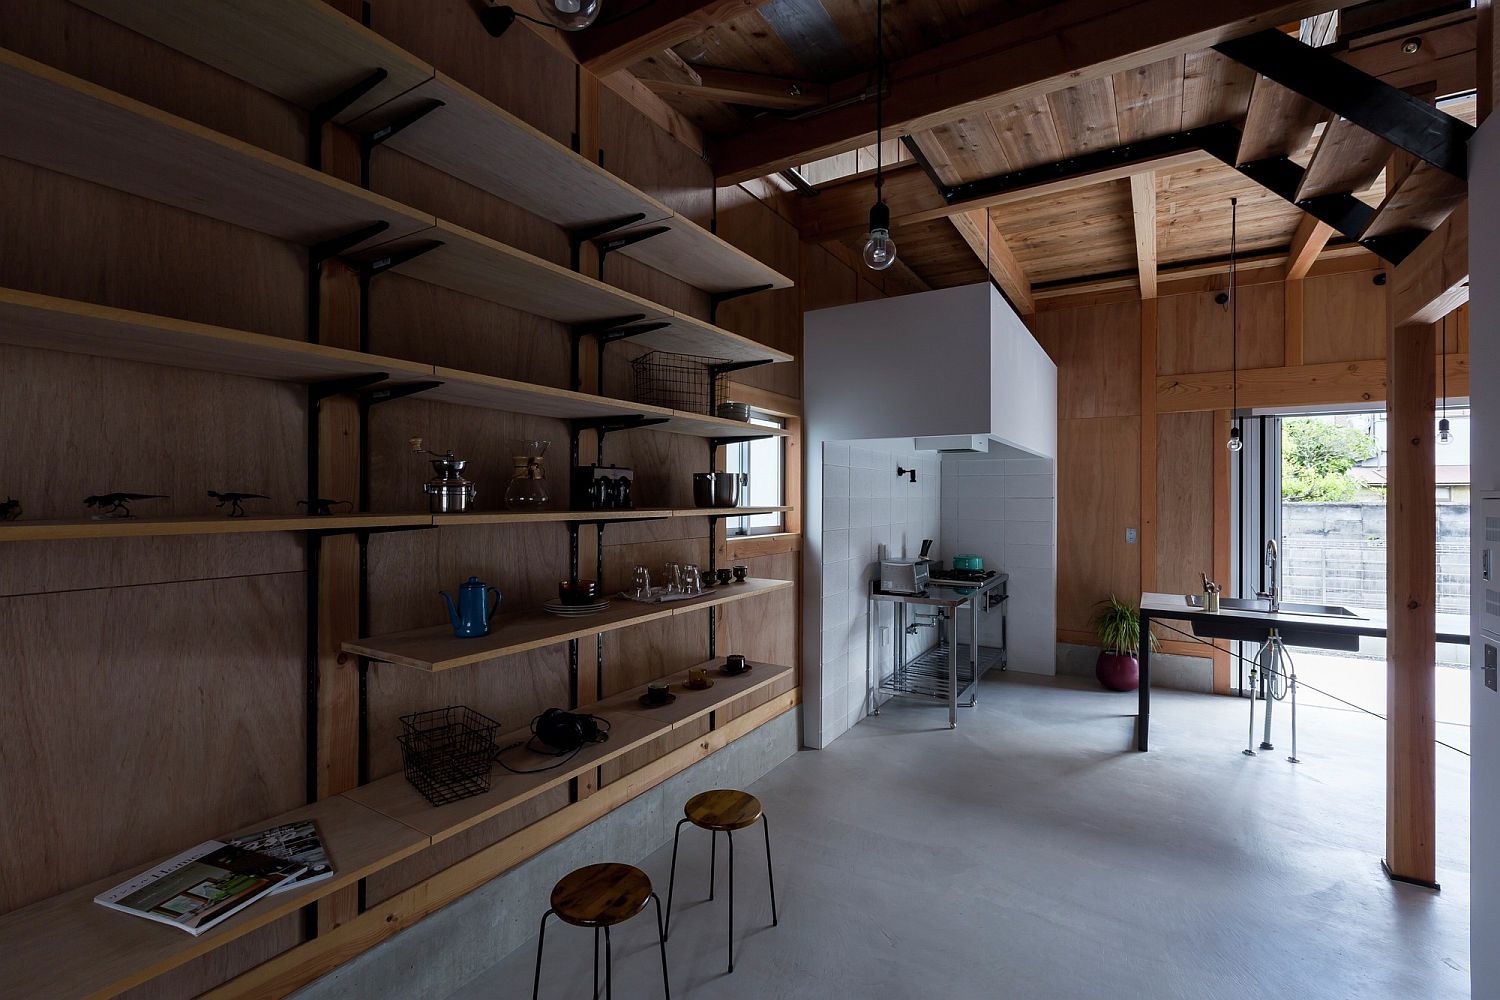 Sleek wooden shelves and open spaces offer flexible and minimal living environment